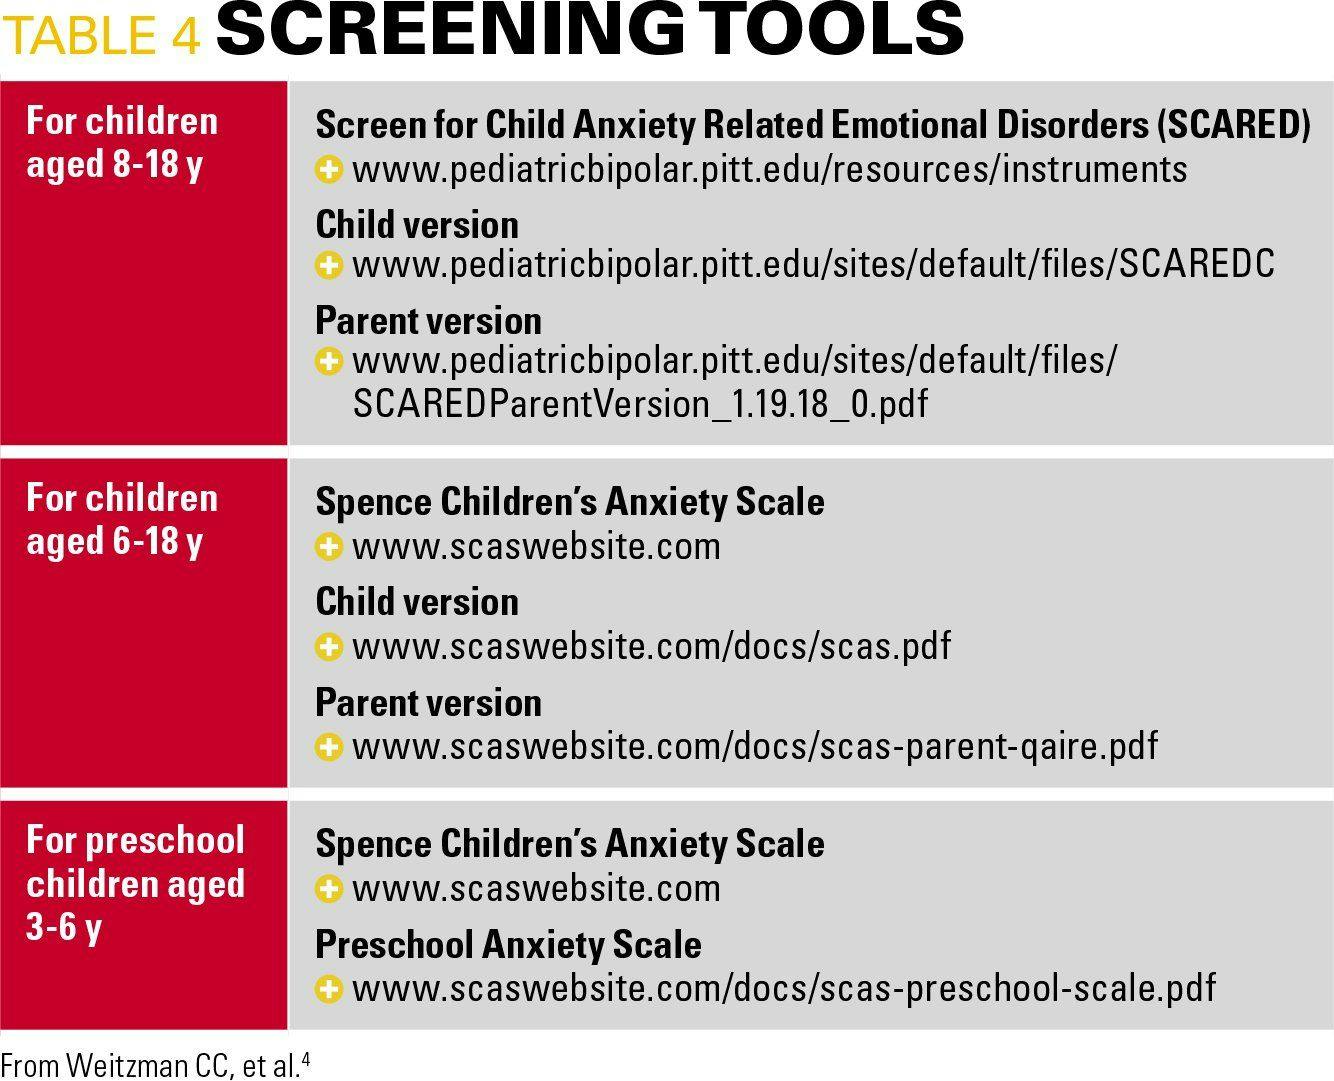 Screening tools for anxiety